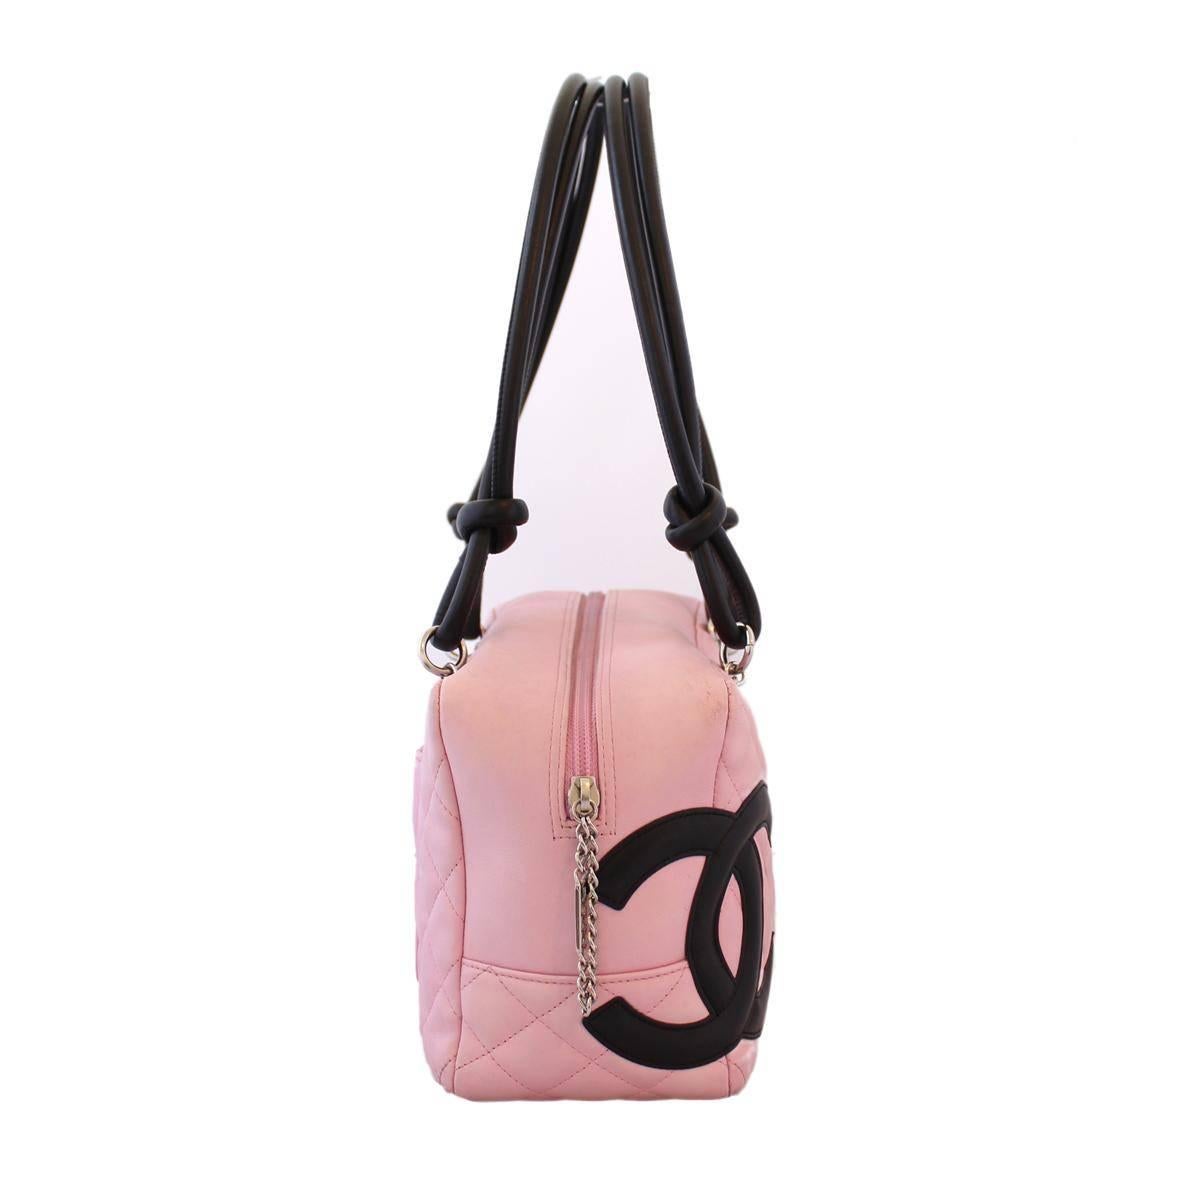 Pink quilted Cambon
Year 2005
Serial code 9344114
Leather
Pink color
Black handles and CC logo
Zip closure
Two handles
Internal zip pocket, phone and pen holders
Cm 27 x 15 x 10 (10.6 x 5.9 x 3.93 inches)
Fair conditions :
Perfect internal
External